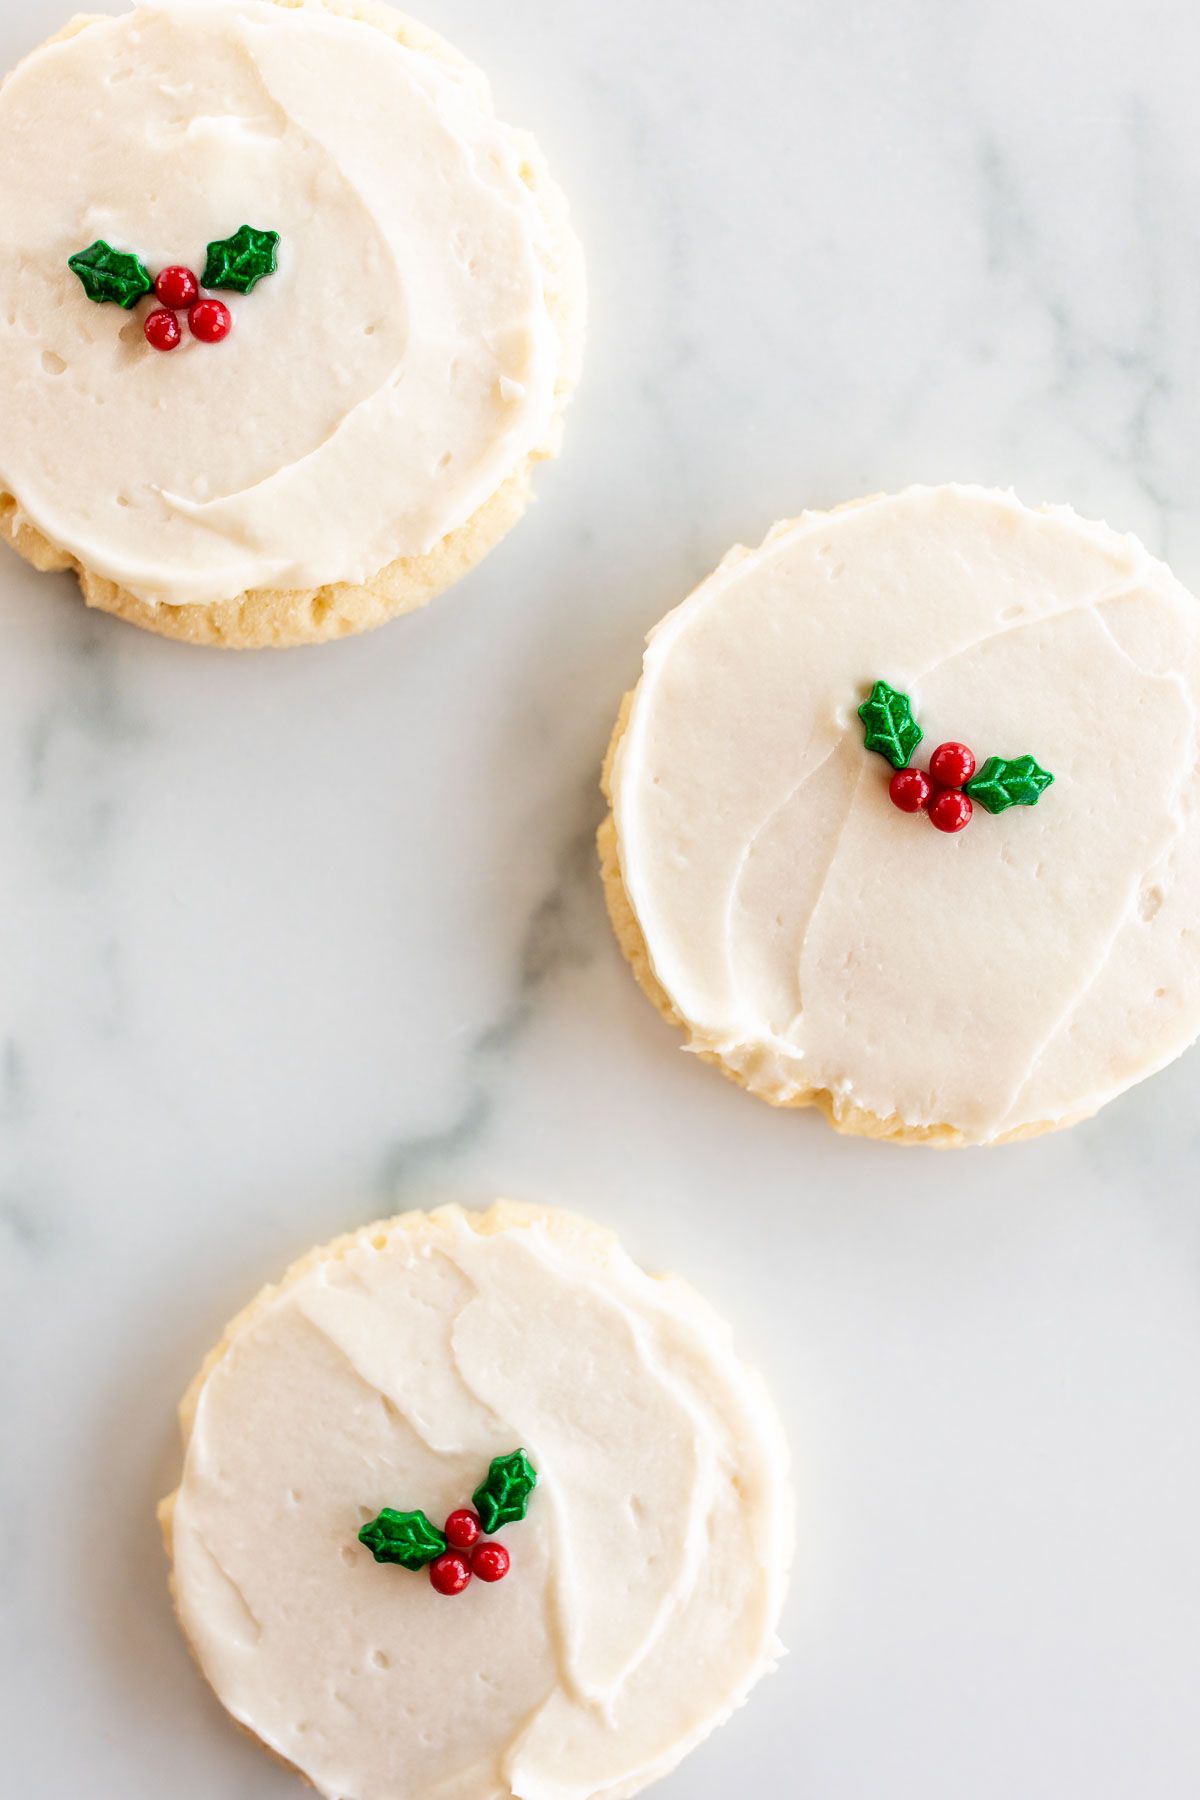 Christmas sugar cookies on a marble surface, with white frosting and a simple holly berry decoration in the center.